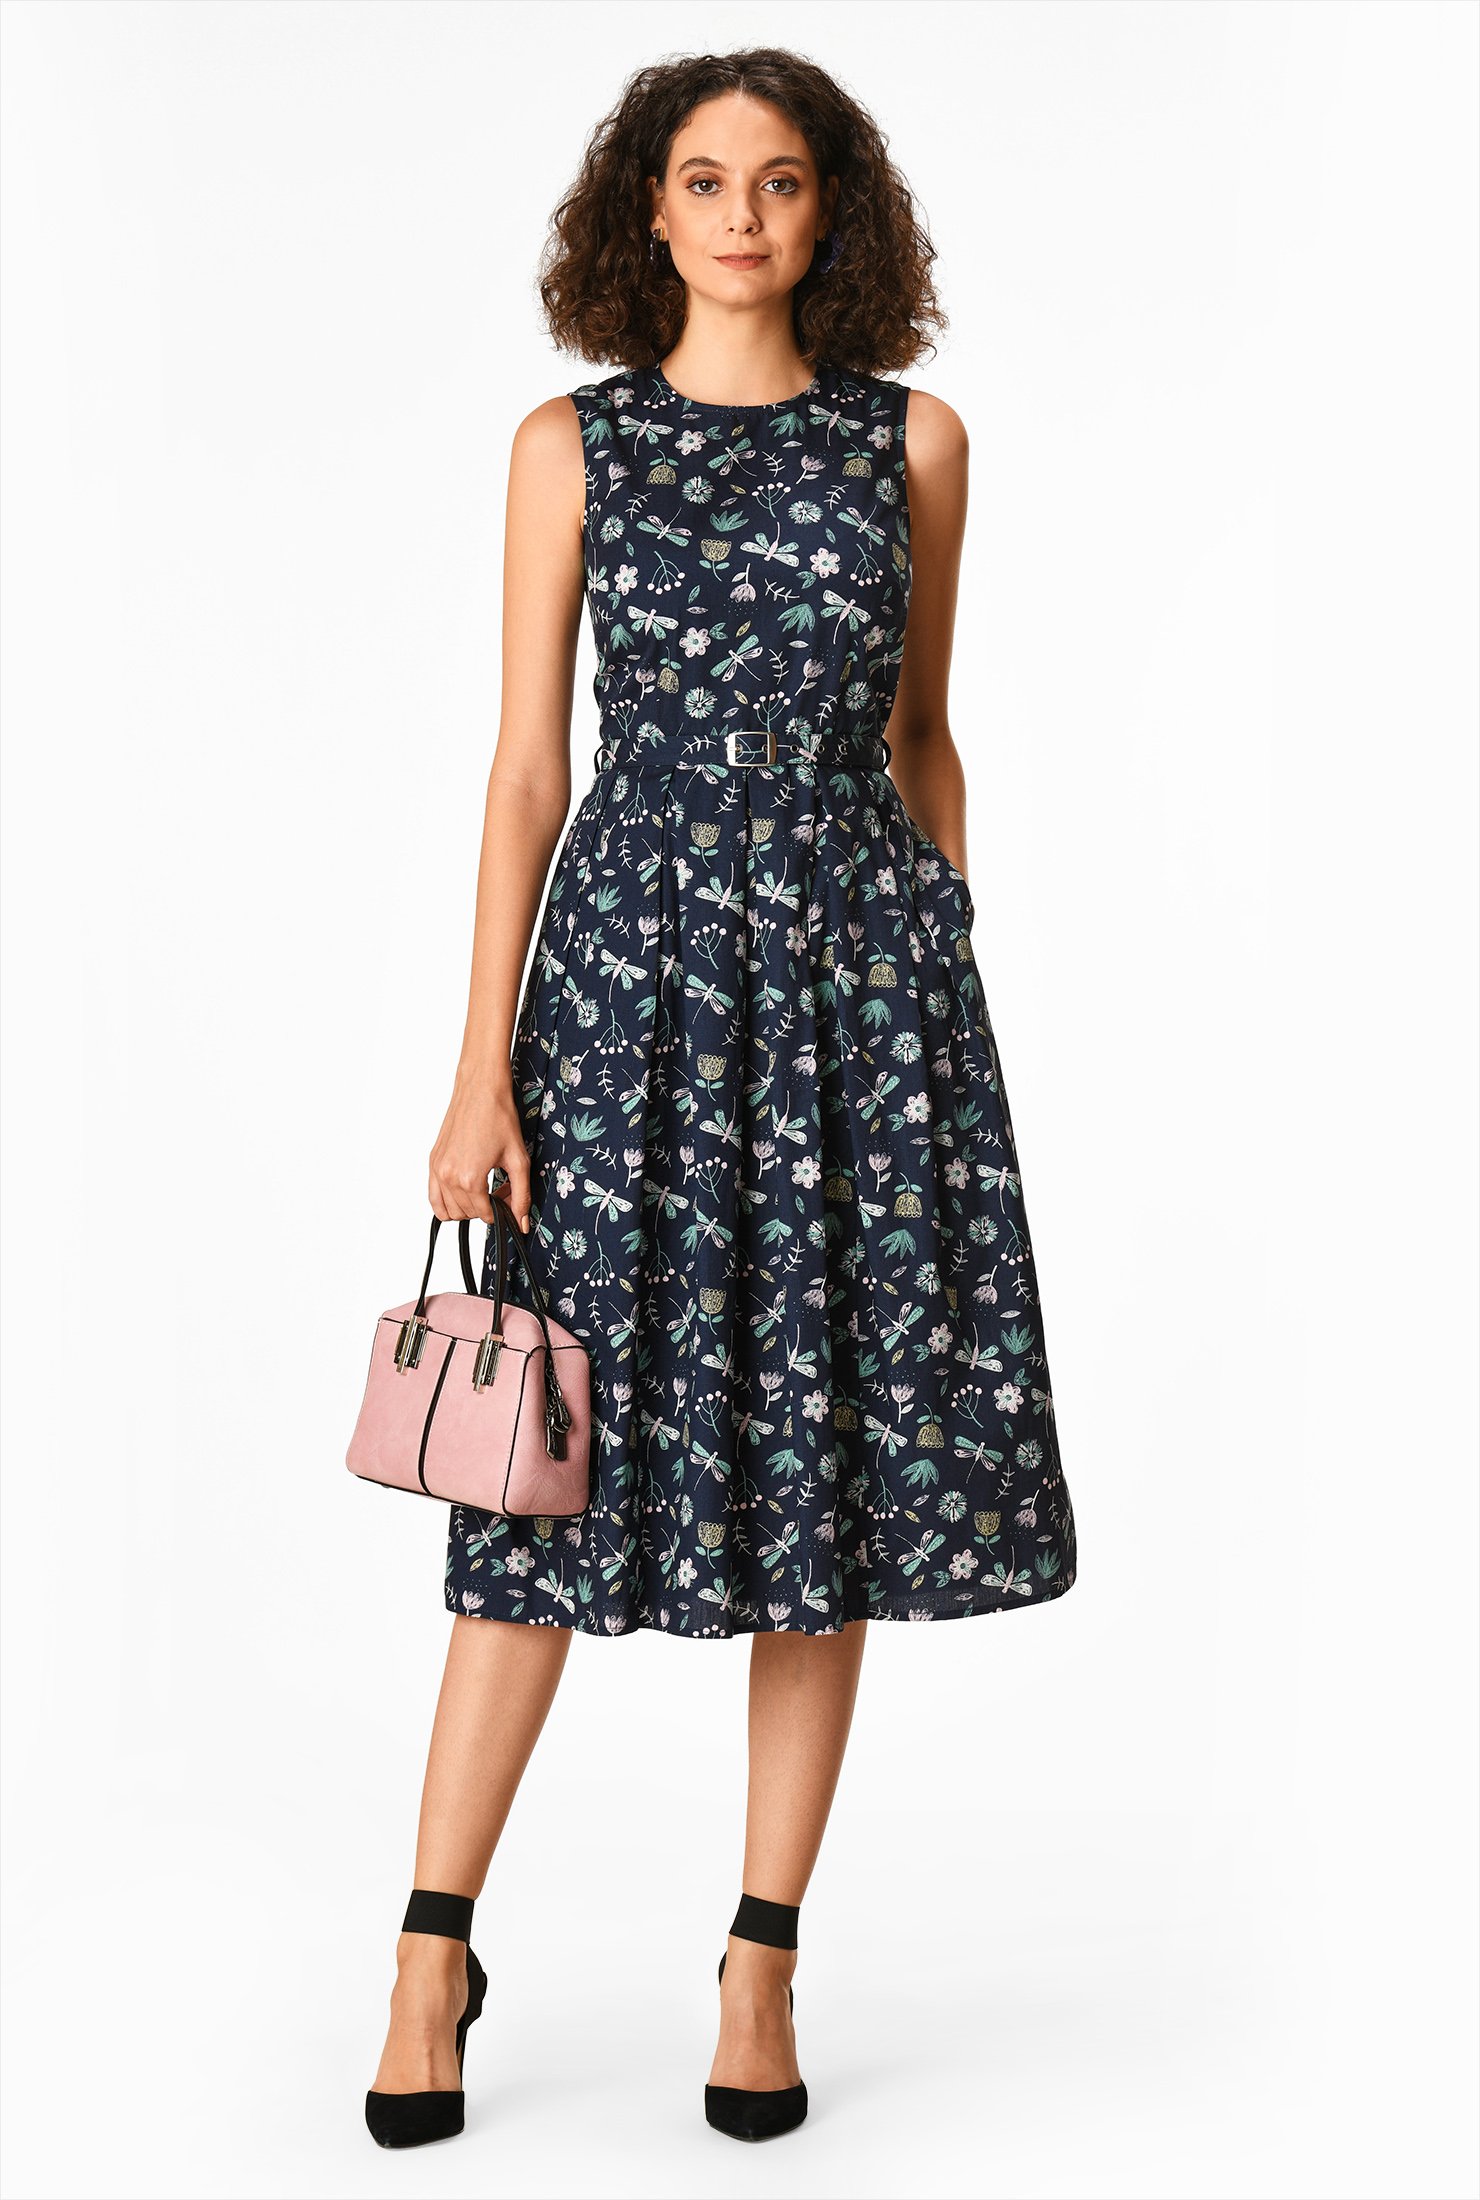 Shop Dragonfly and floral print cotton belted dress | eShakti